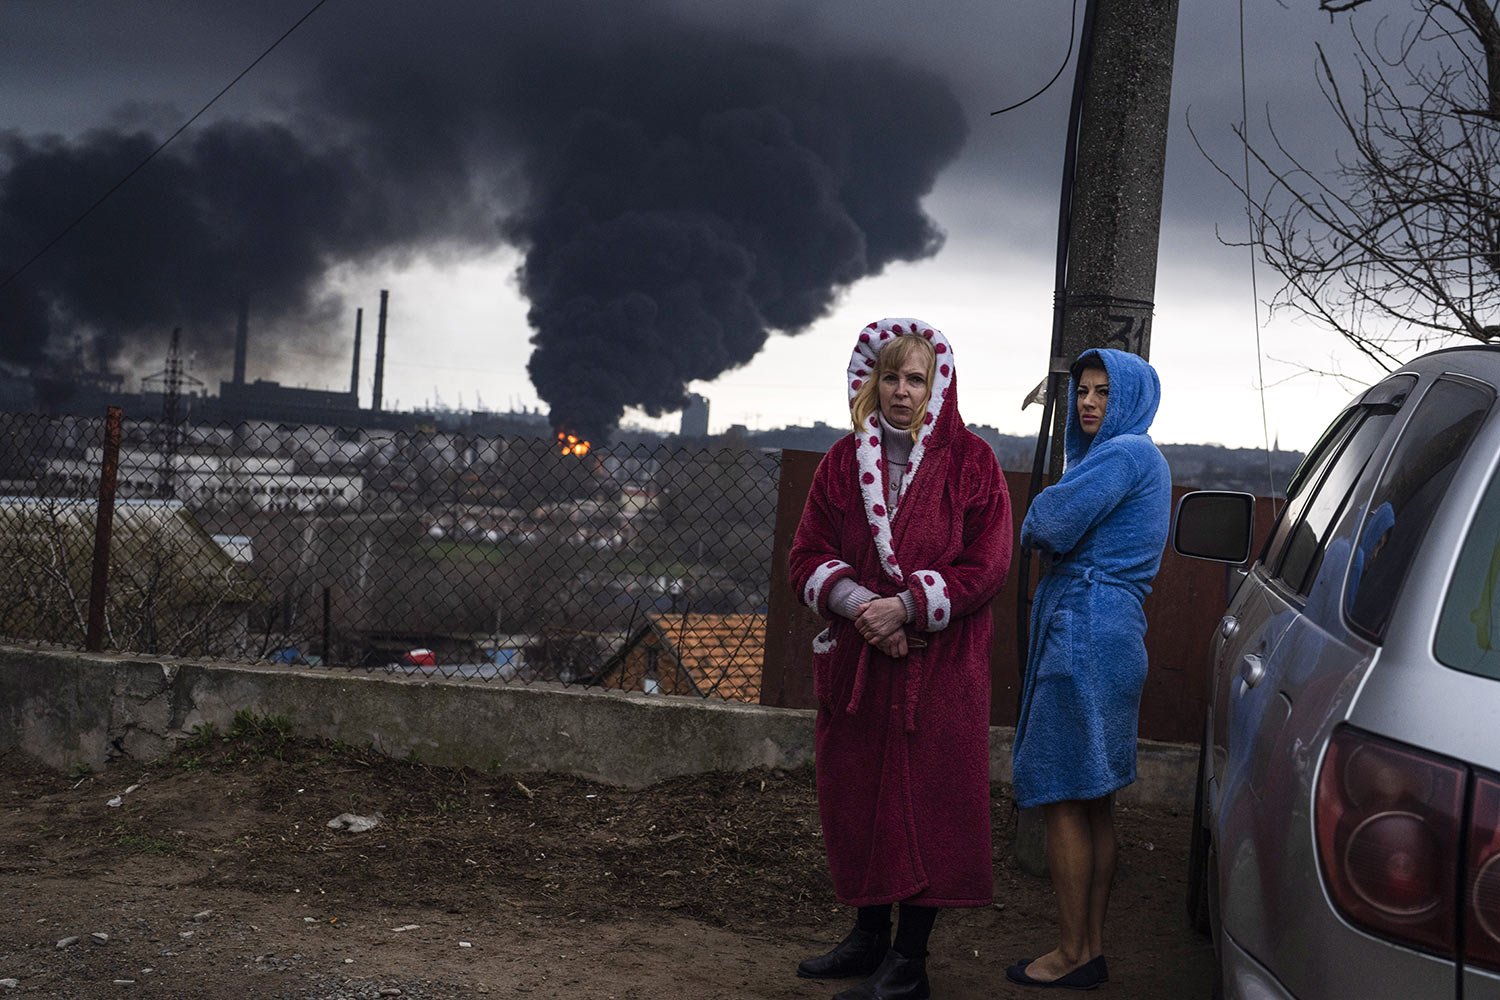  Women stand in their robes as smoke rises in the background after shelling in Odesa, Ukraine, Sunday, April 3, 2022. (AP Photo/Petros Giannakouris) 